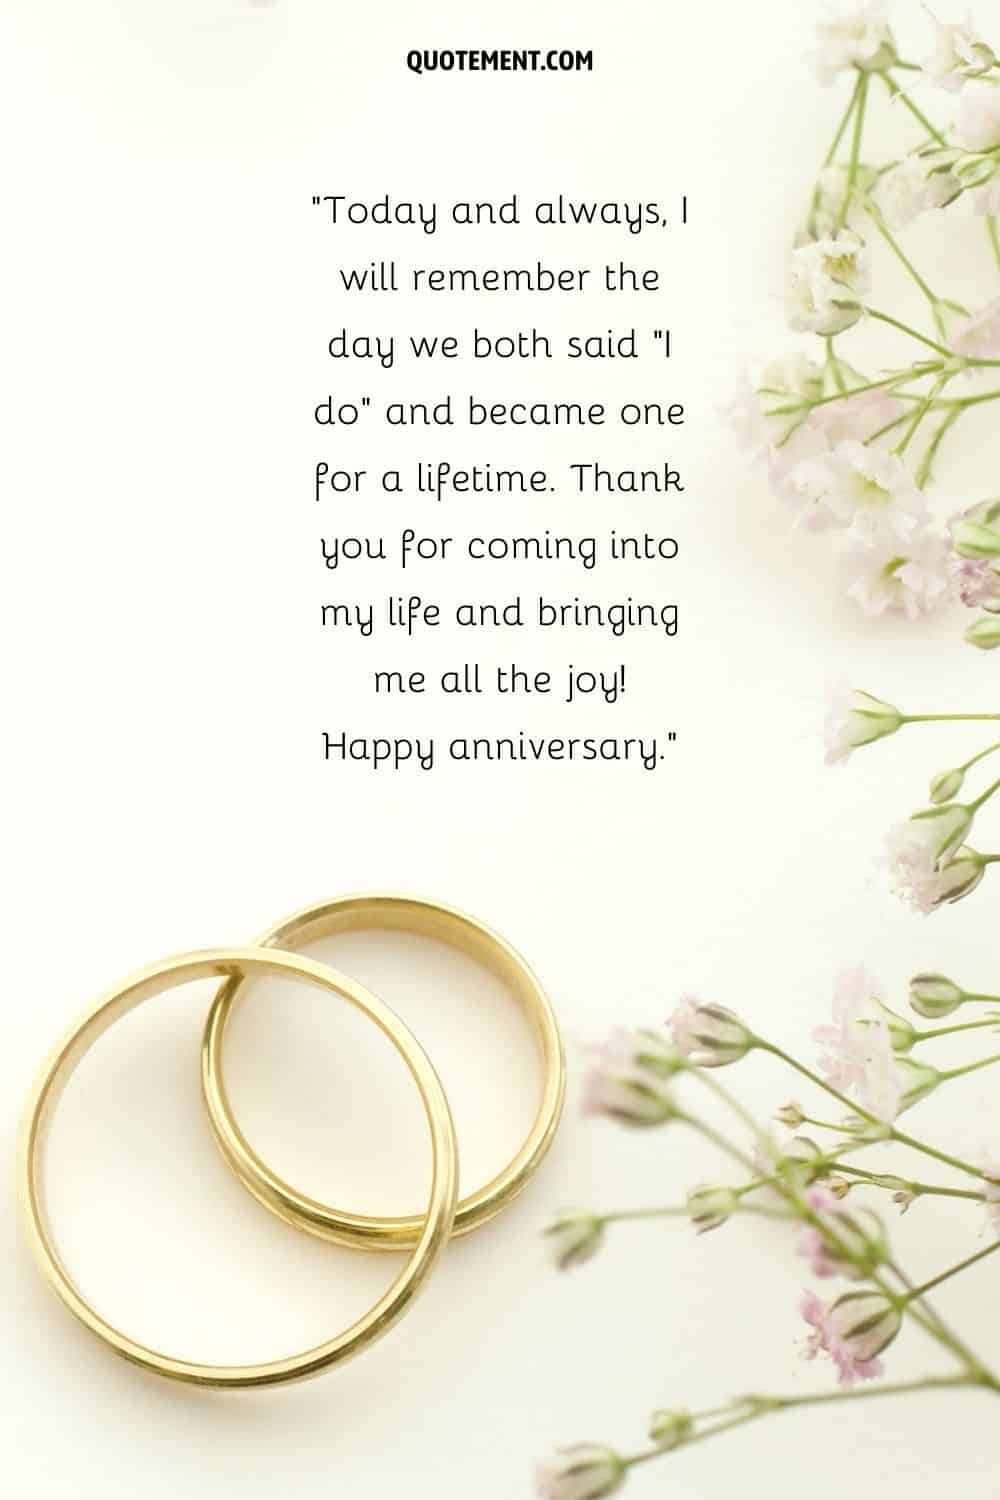 golden wedding rings and flowers representing anniversary quote for her